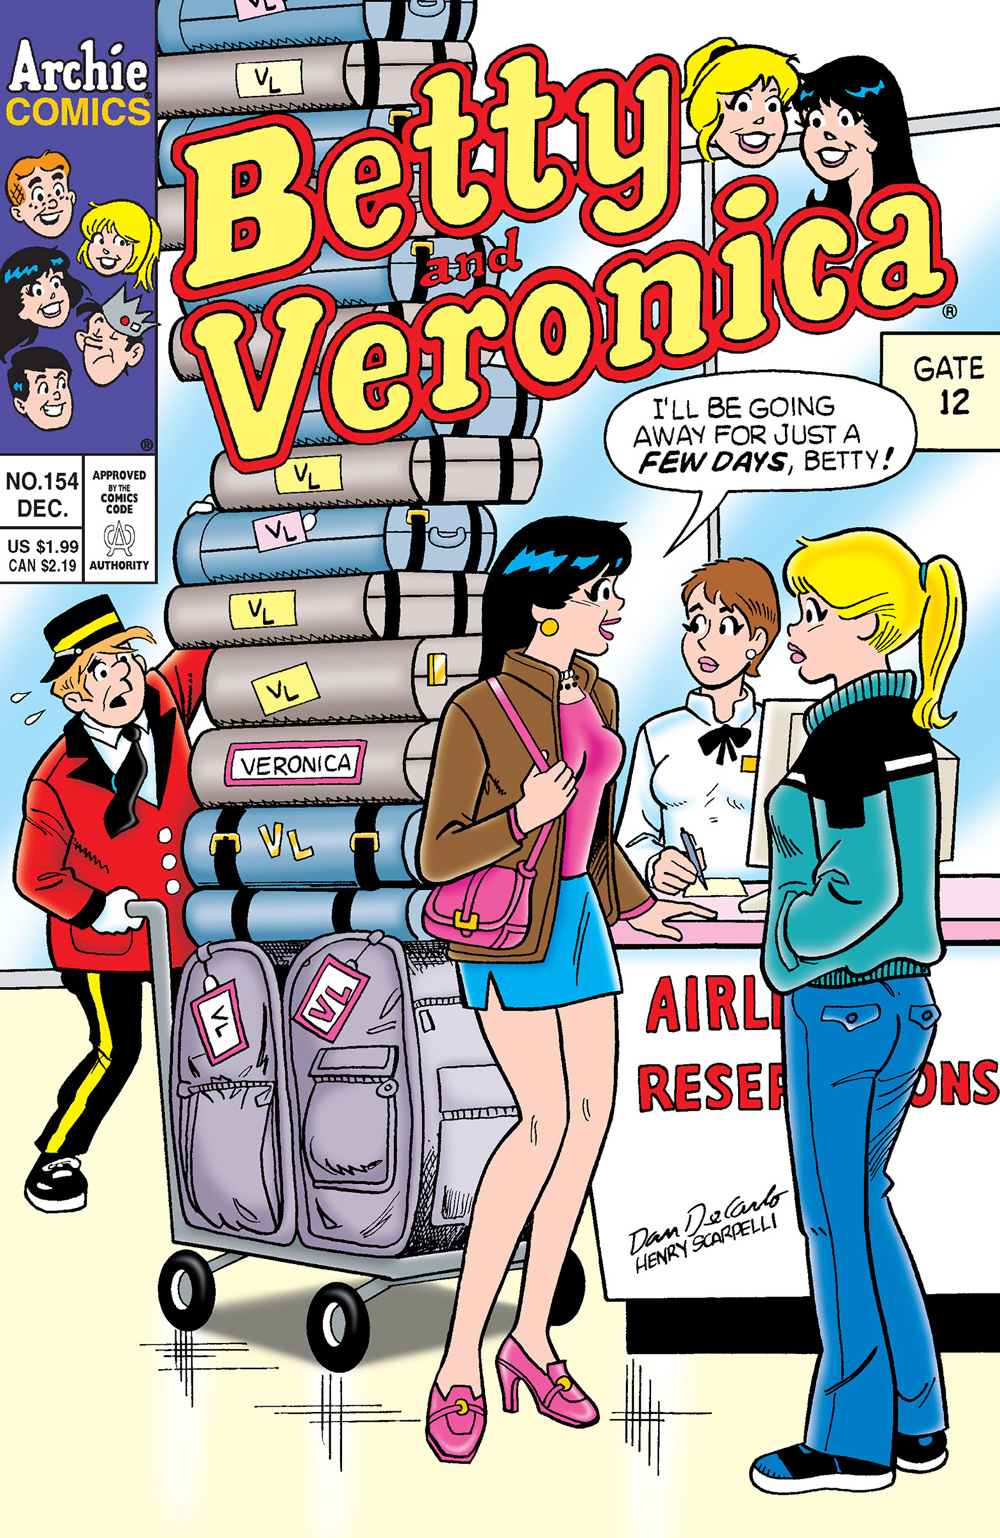 Veronica is at the airport with a towering pile of suitcases pushed on a trolley by an exhausted porter. She tells Betty she will only be gone for a few days.